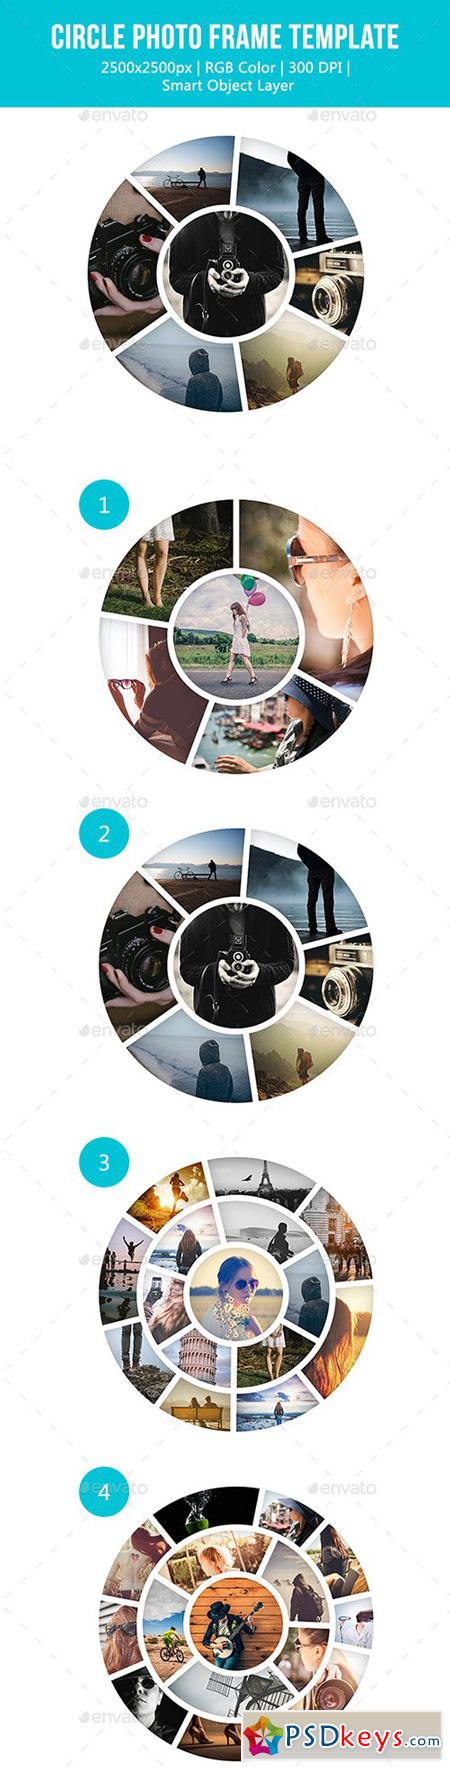 Download Circle Photo Frame Templates 12581845 » Free Download Photoshop Vector Stock image Via Torrent ...